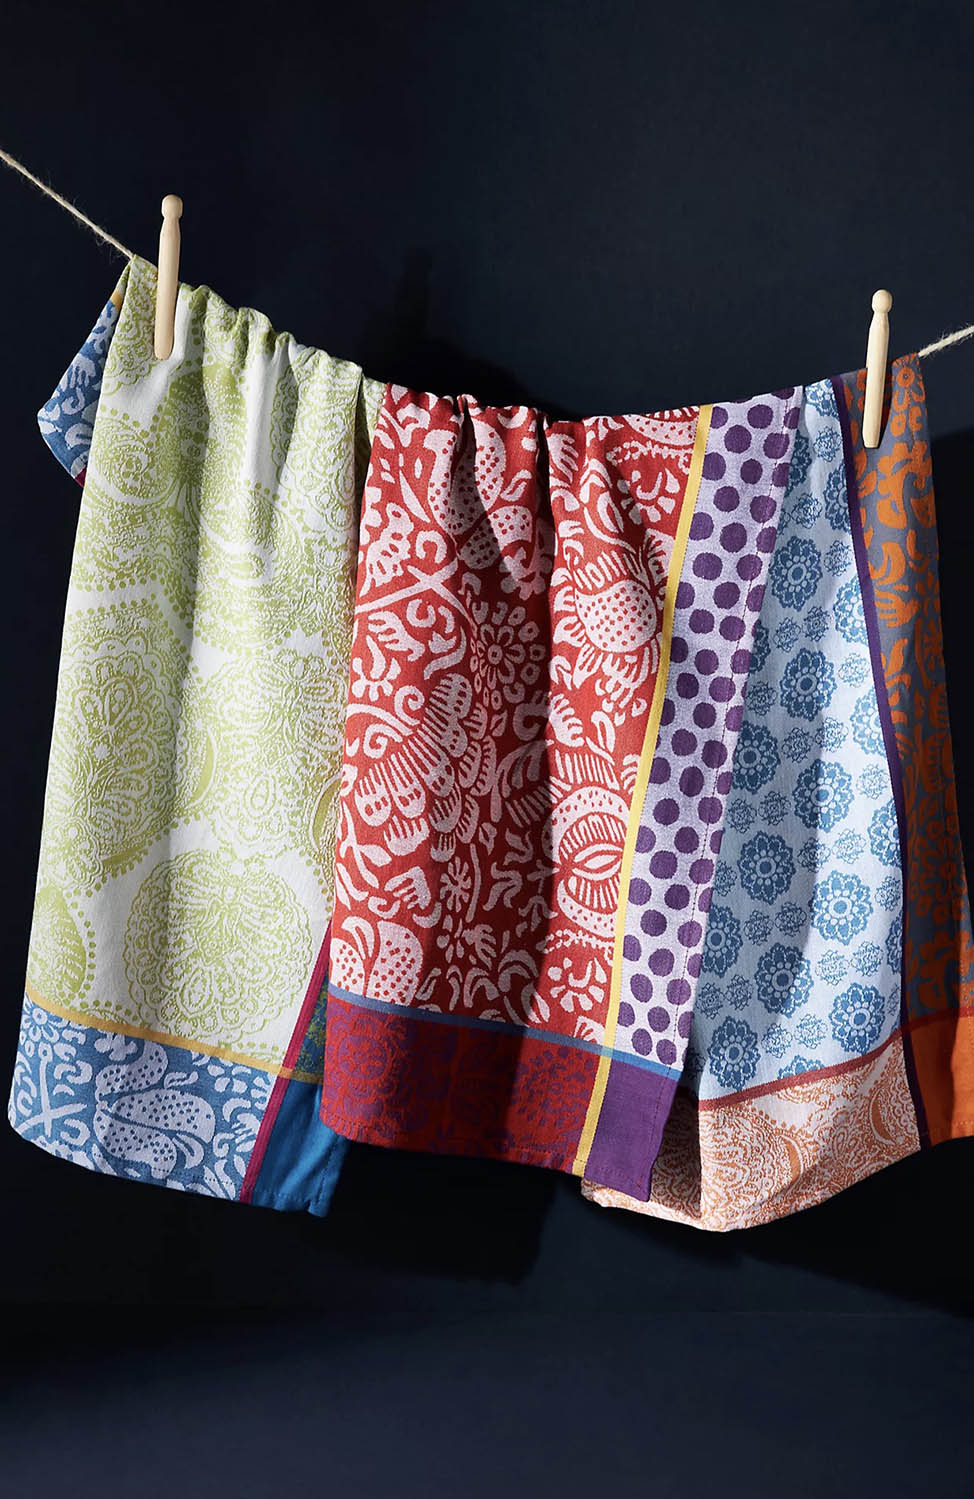 Holiday gift ideas: Tea towels from Anthropologie